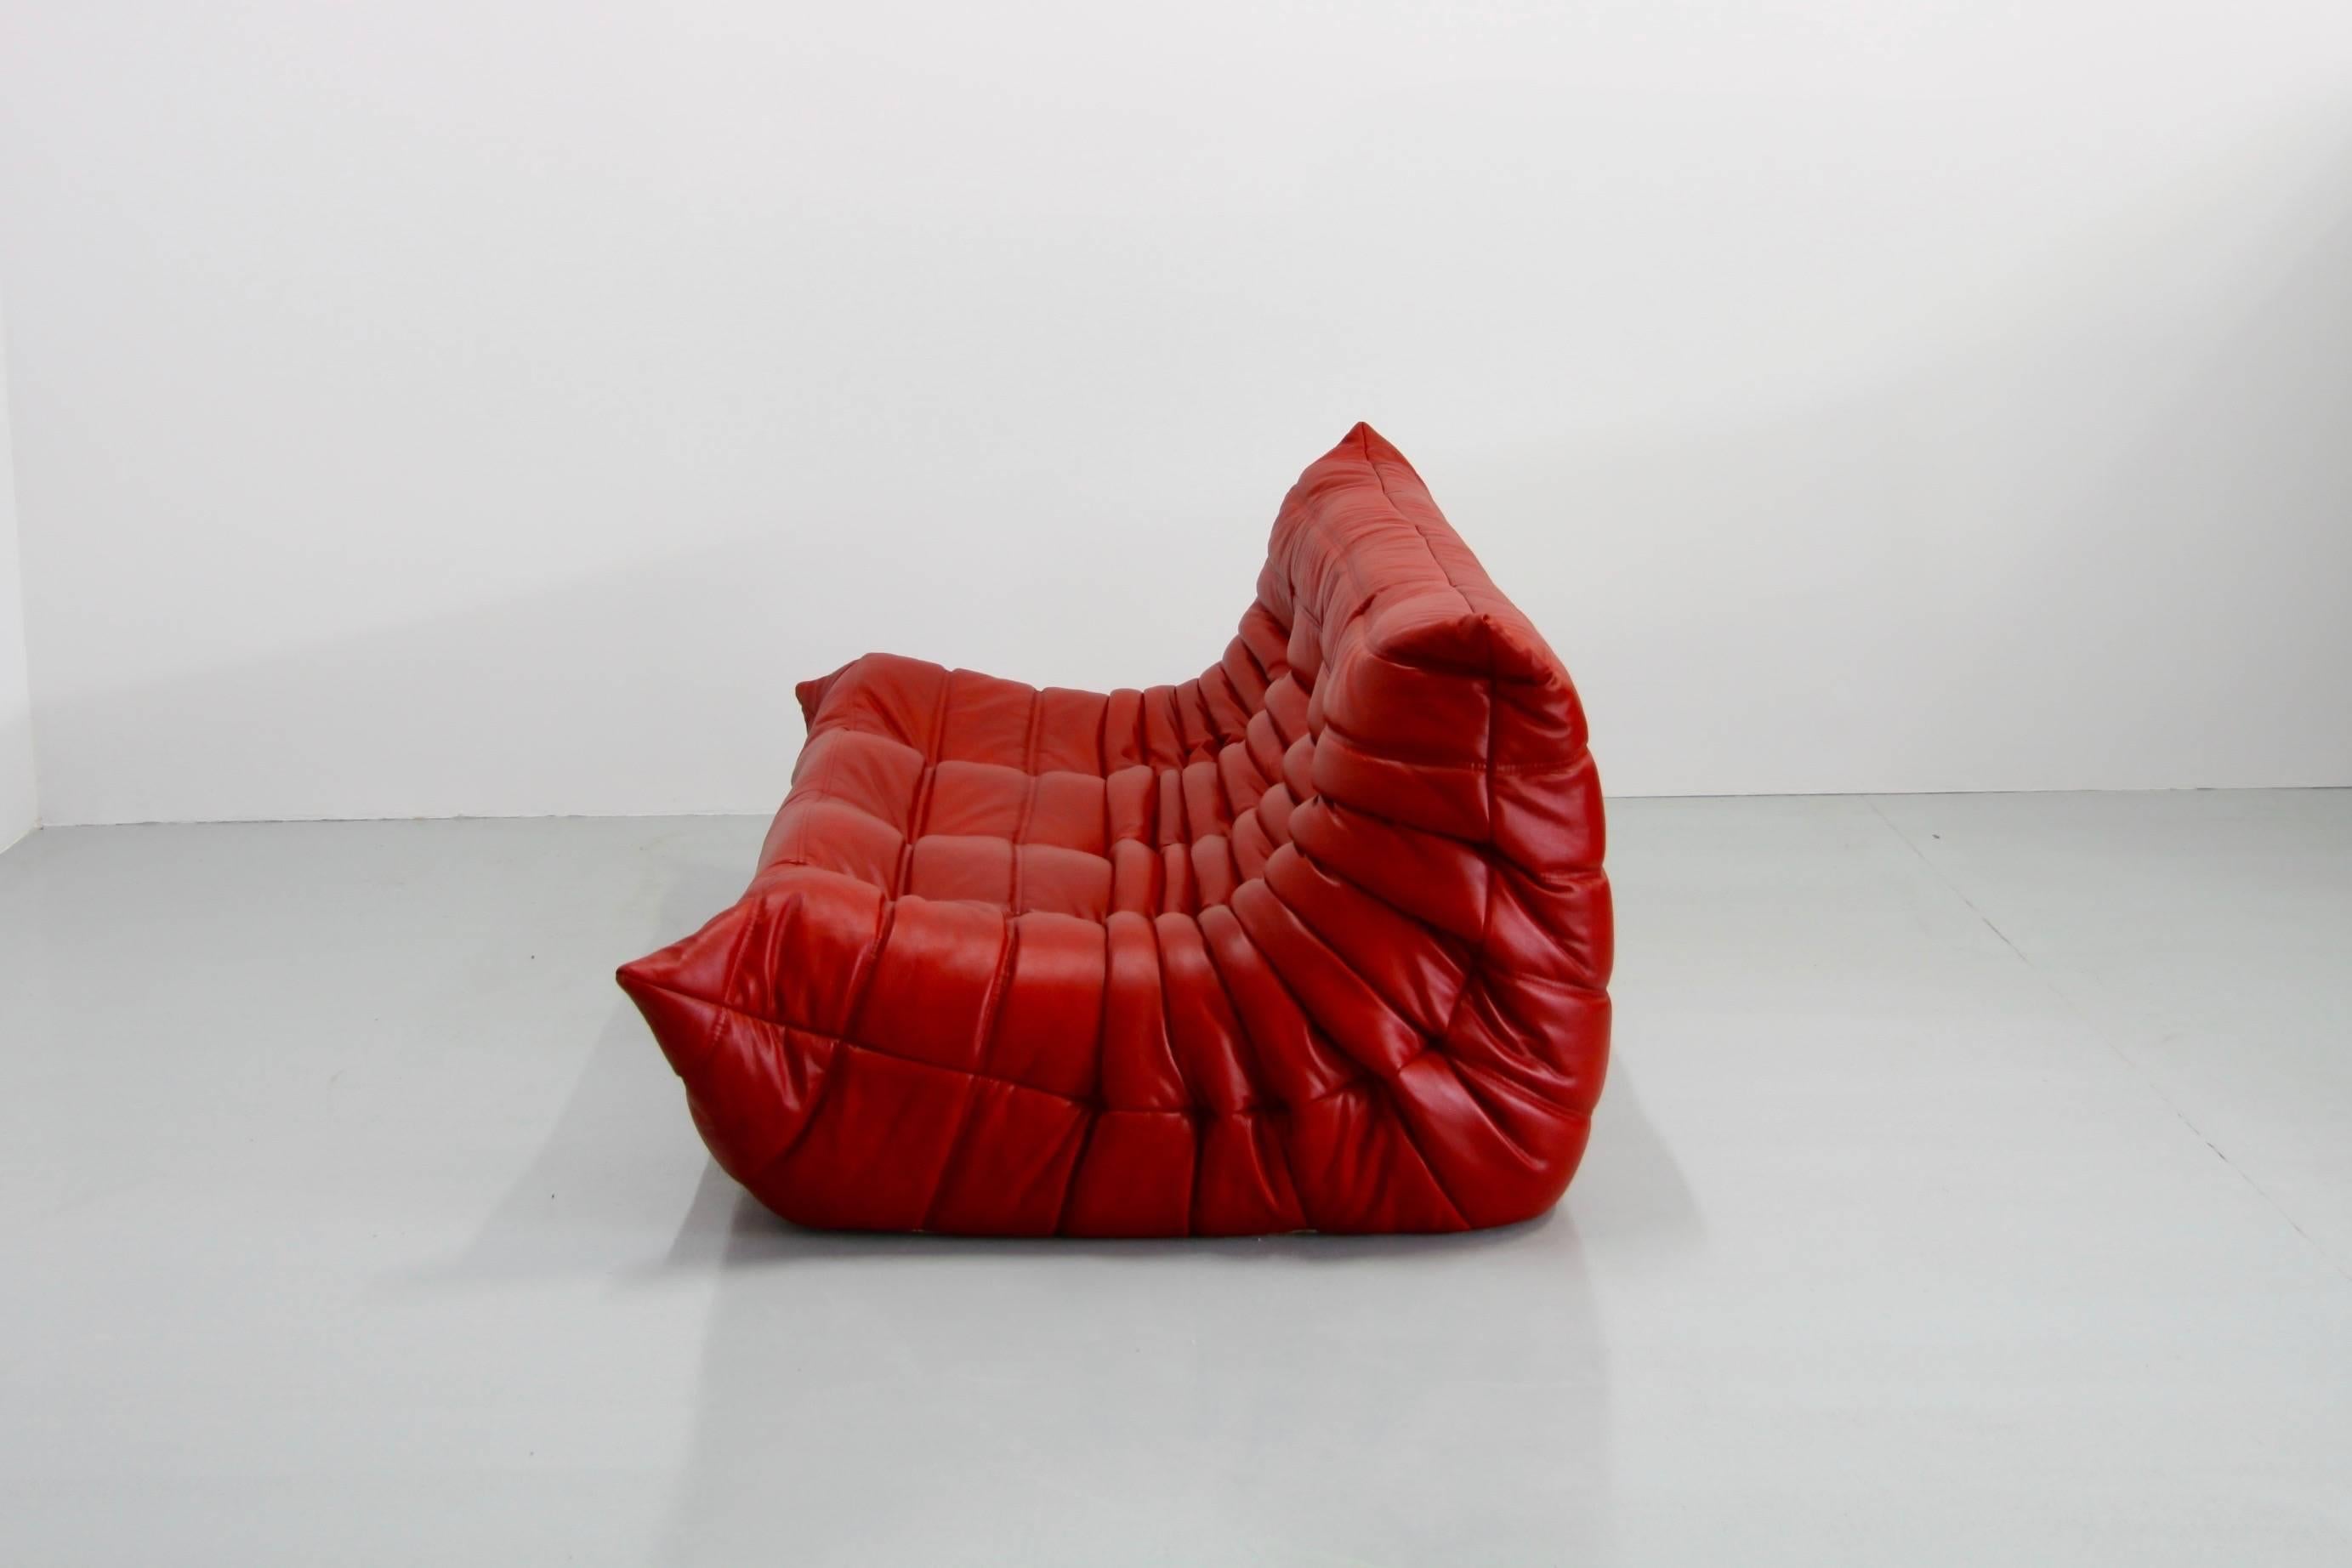 Mid-Century Modern Red Leather Togo Sofa by Michel Ducaroy for Ligne Roset, 1974, Red Leather Togo